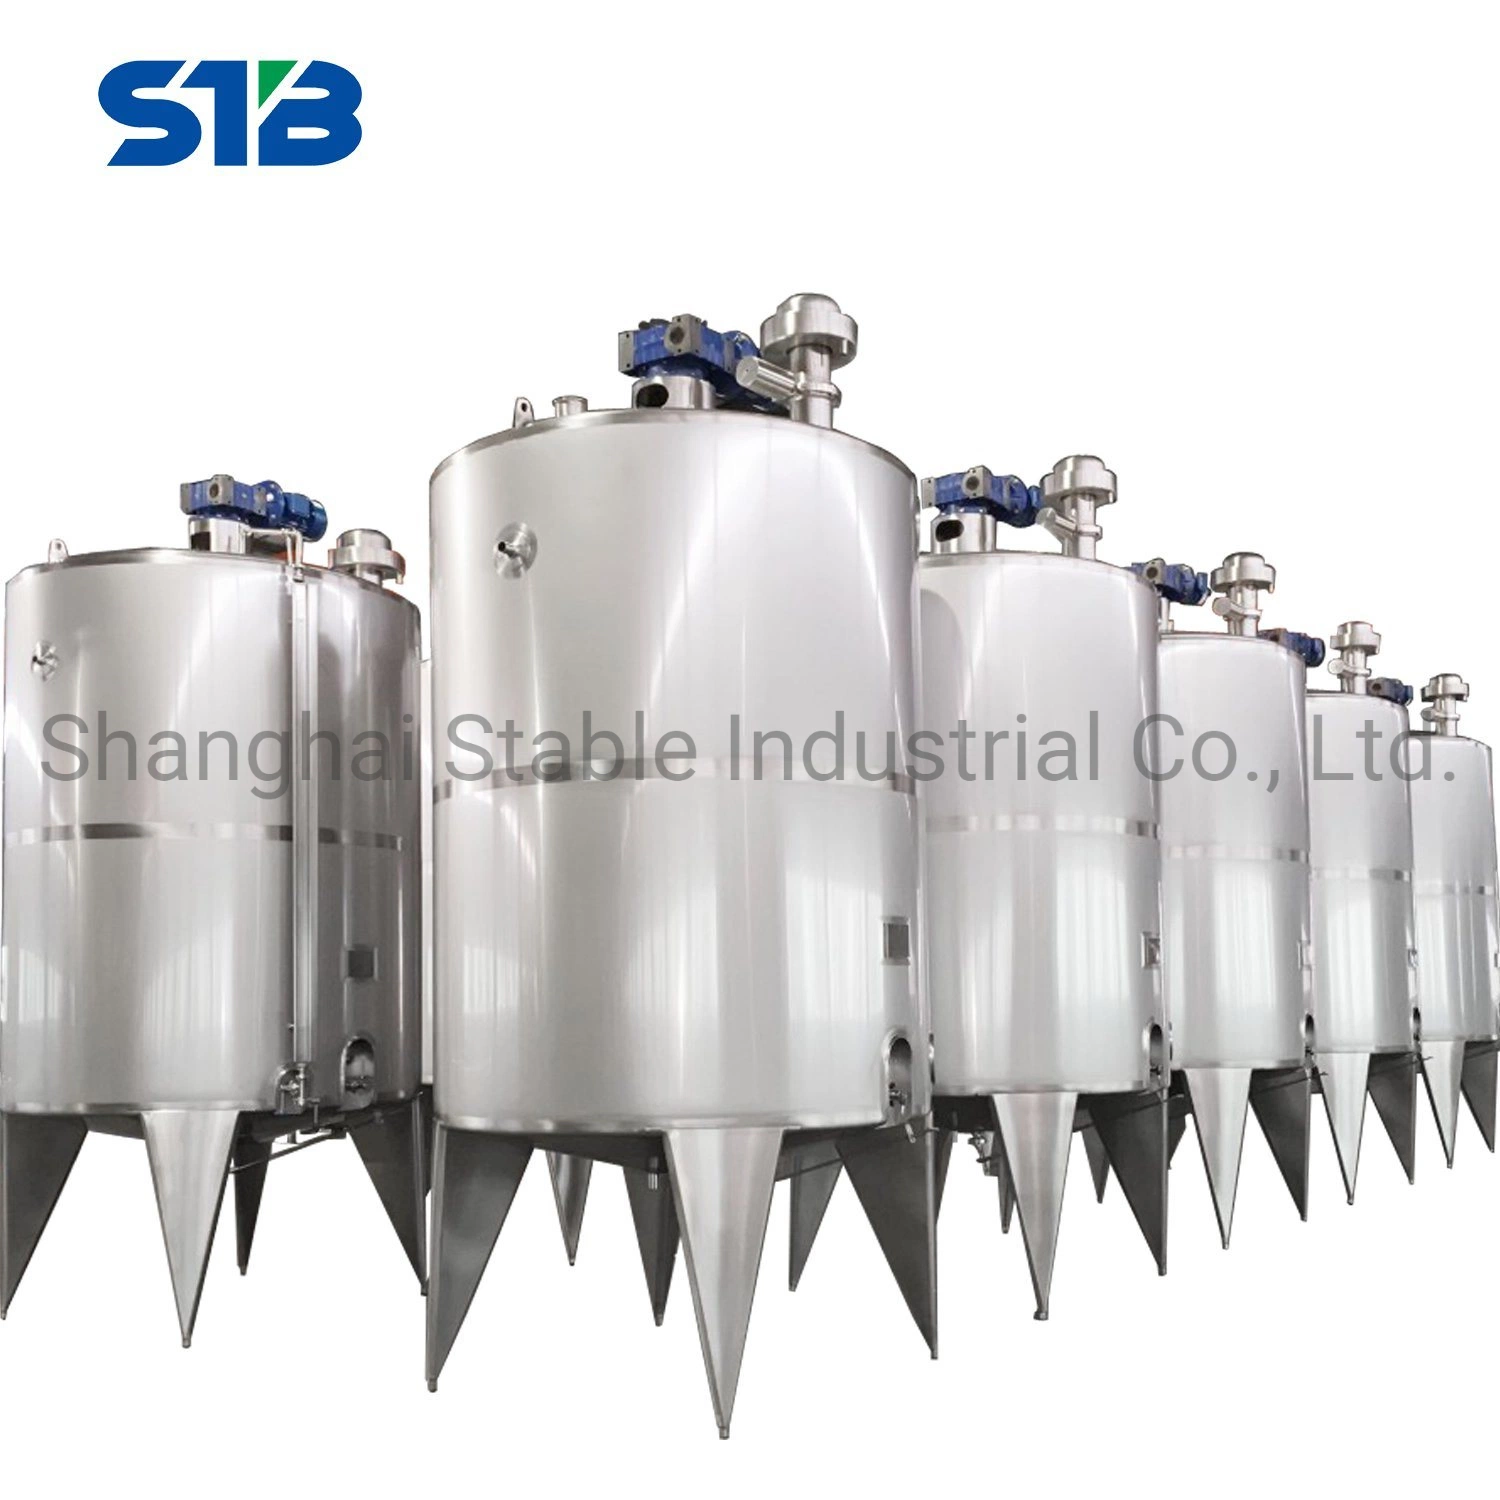 Bulk Storage Tanks/Stainless Steel Milk Cooler for Dairy Pre-Treatment Process